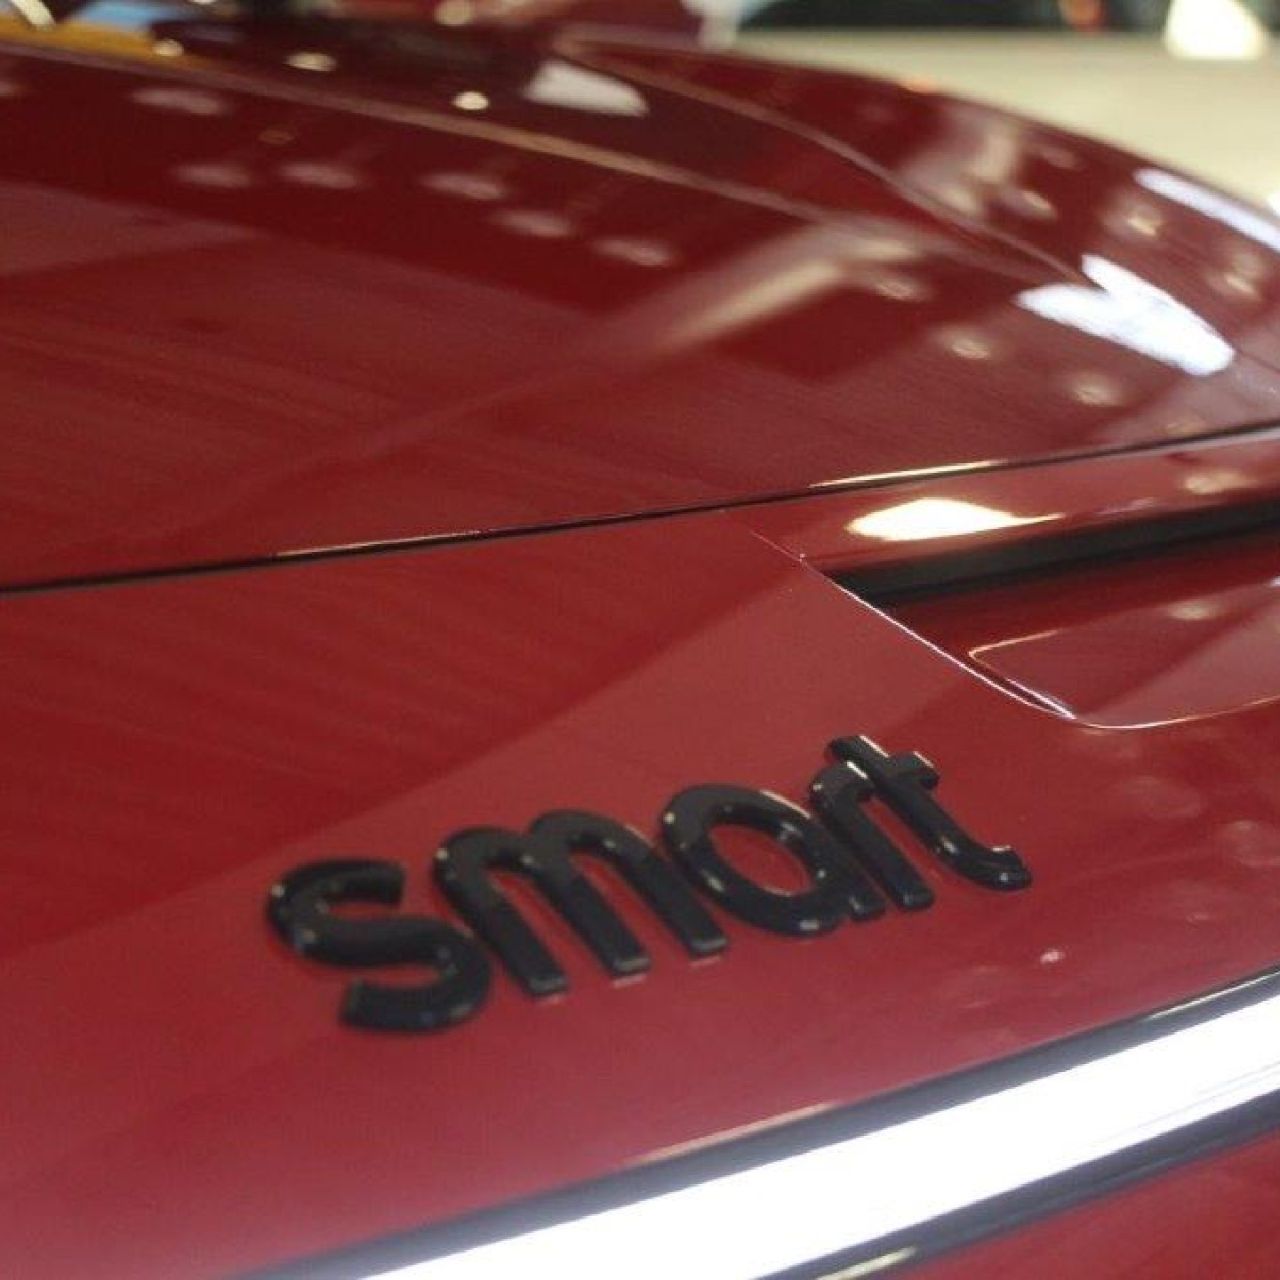 STERNAUTO Group celebrates 25 years of smart in Dresden.